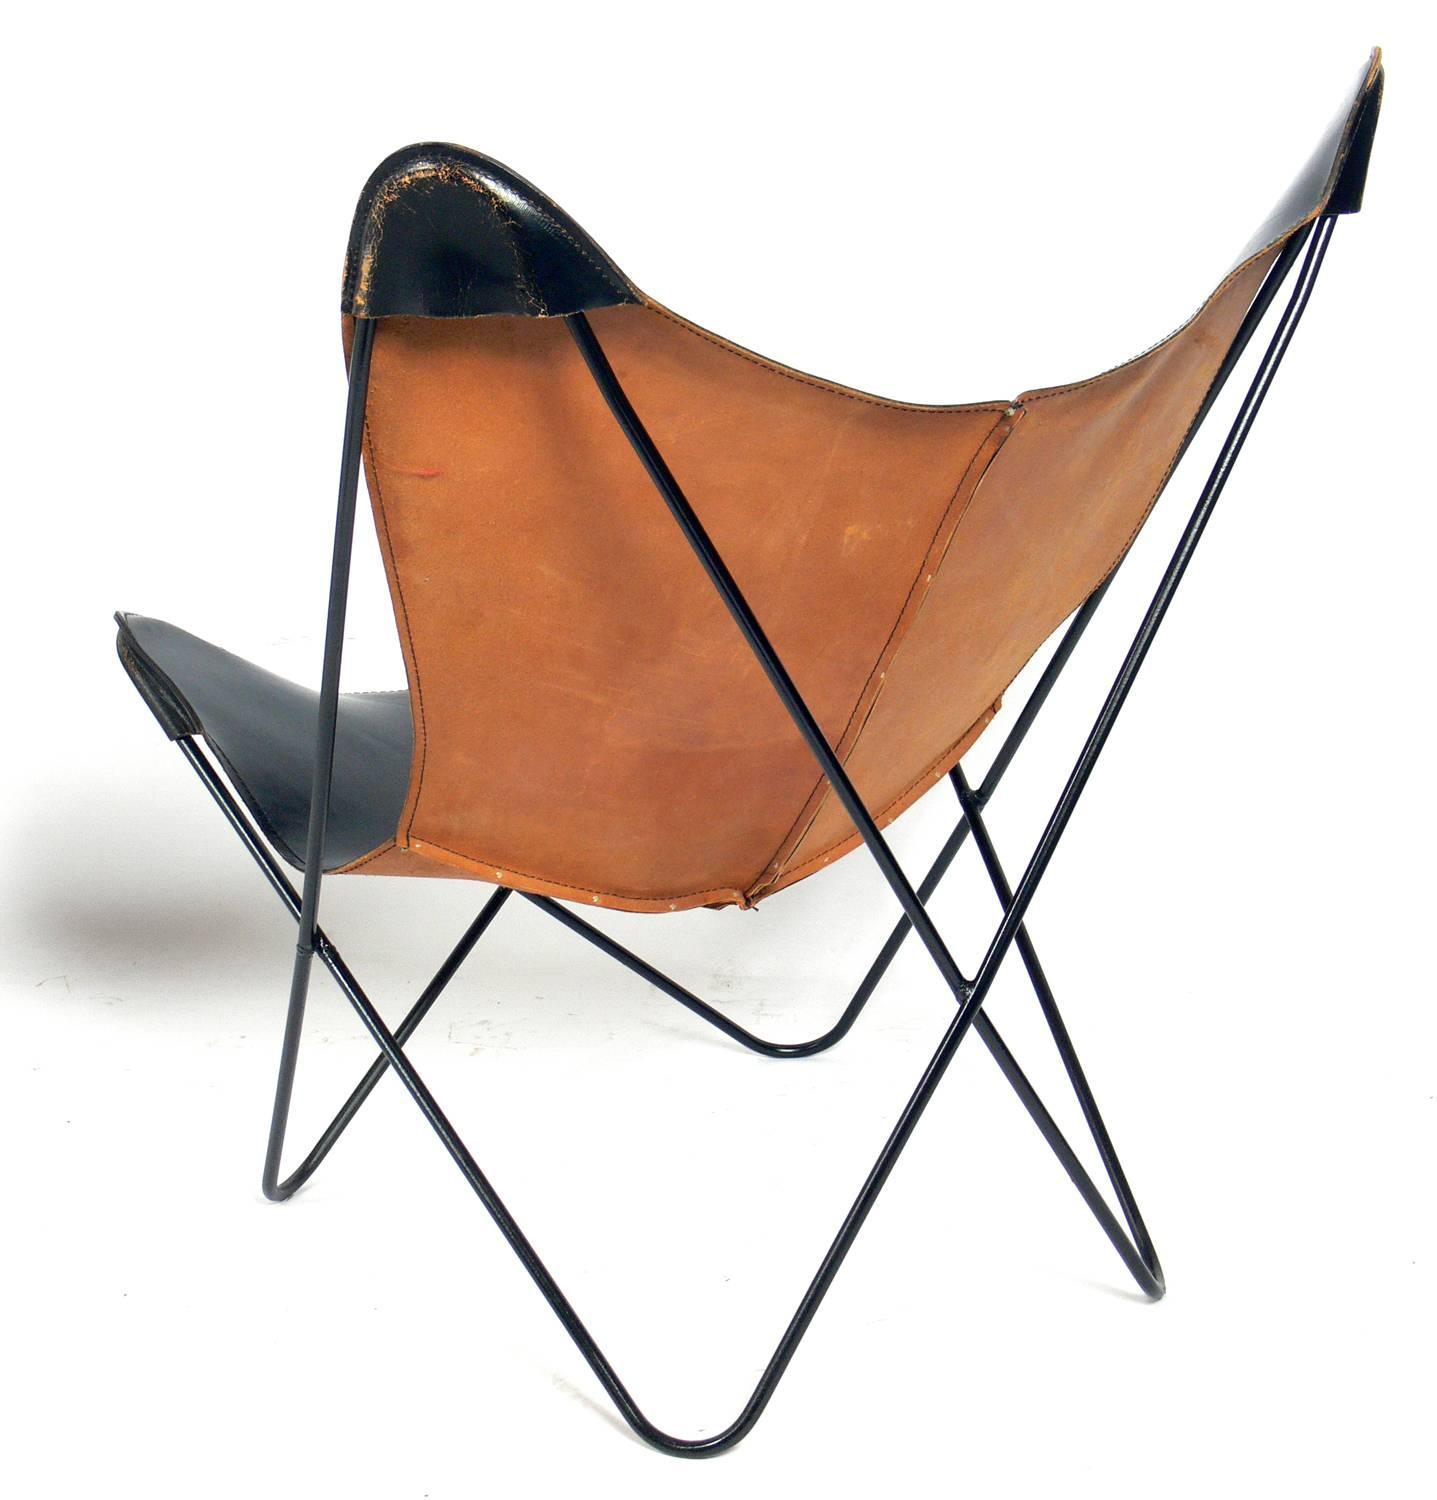 Sculptural Leather Butterfly Chairs Designed by Jorge Ferrari-Hardoy 1